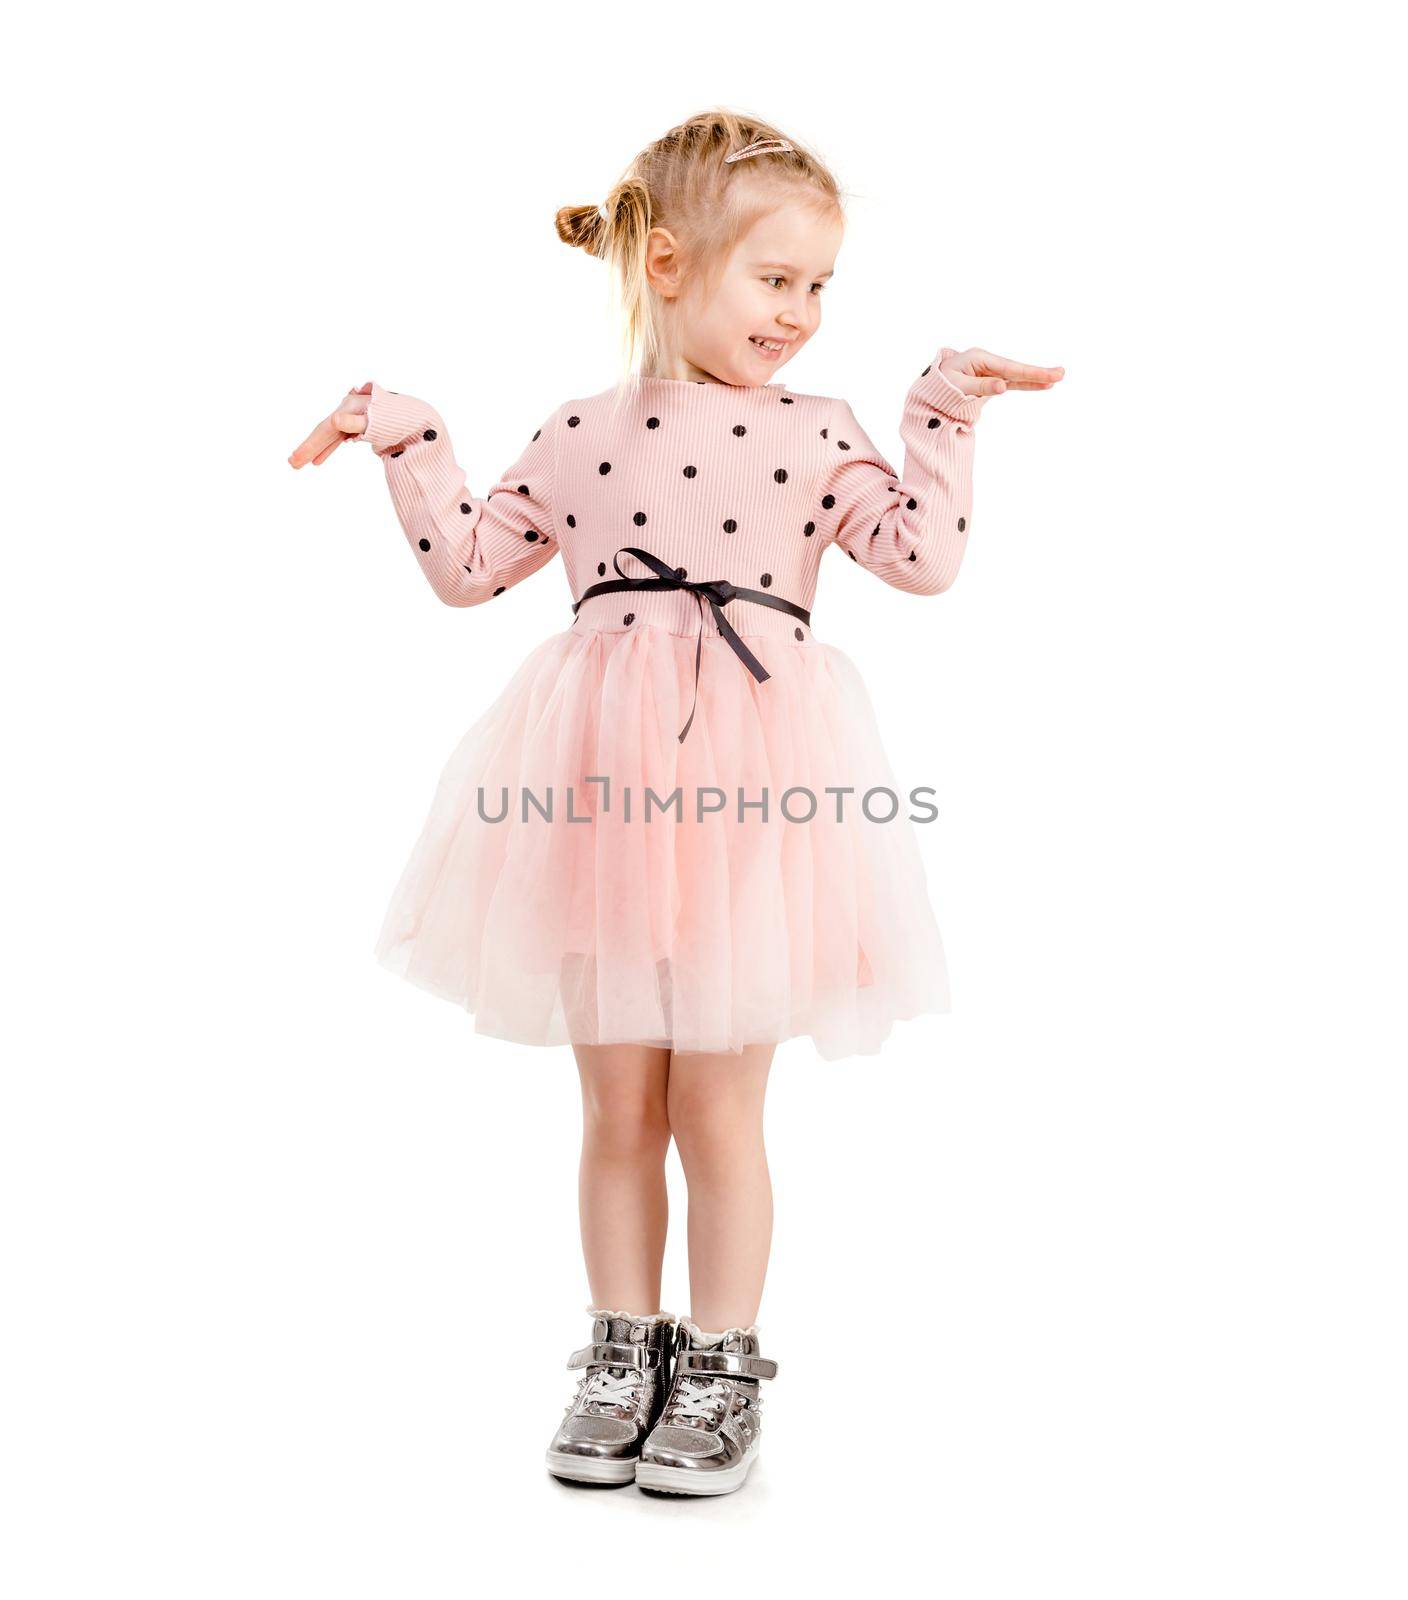 Amazing girl in a funny pose, holding her hands, dressed in pink polkadot clothes, isolated